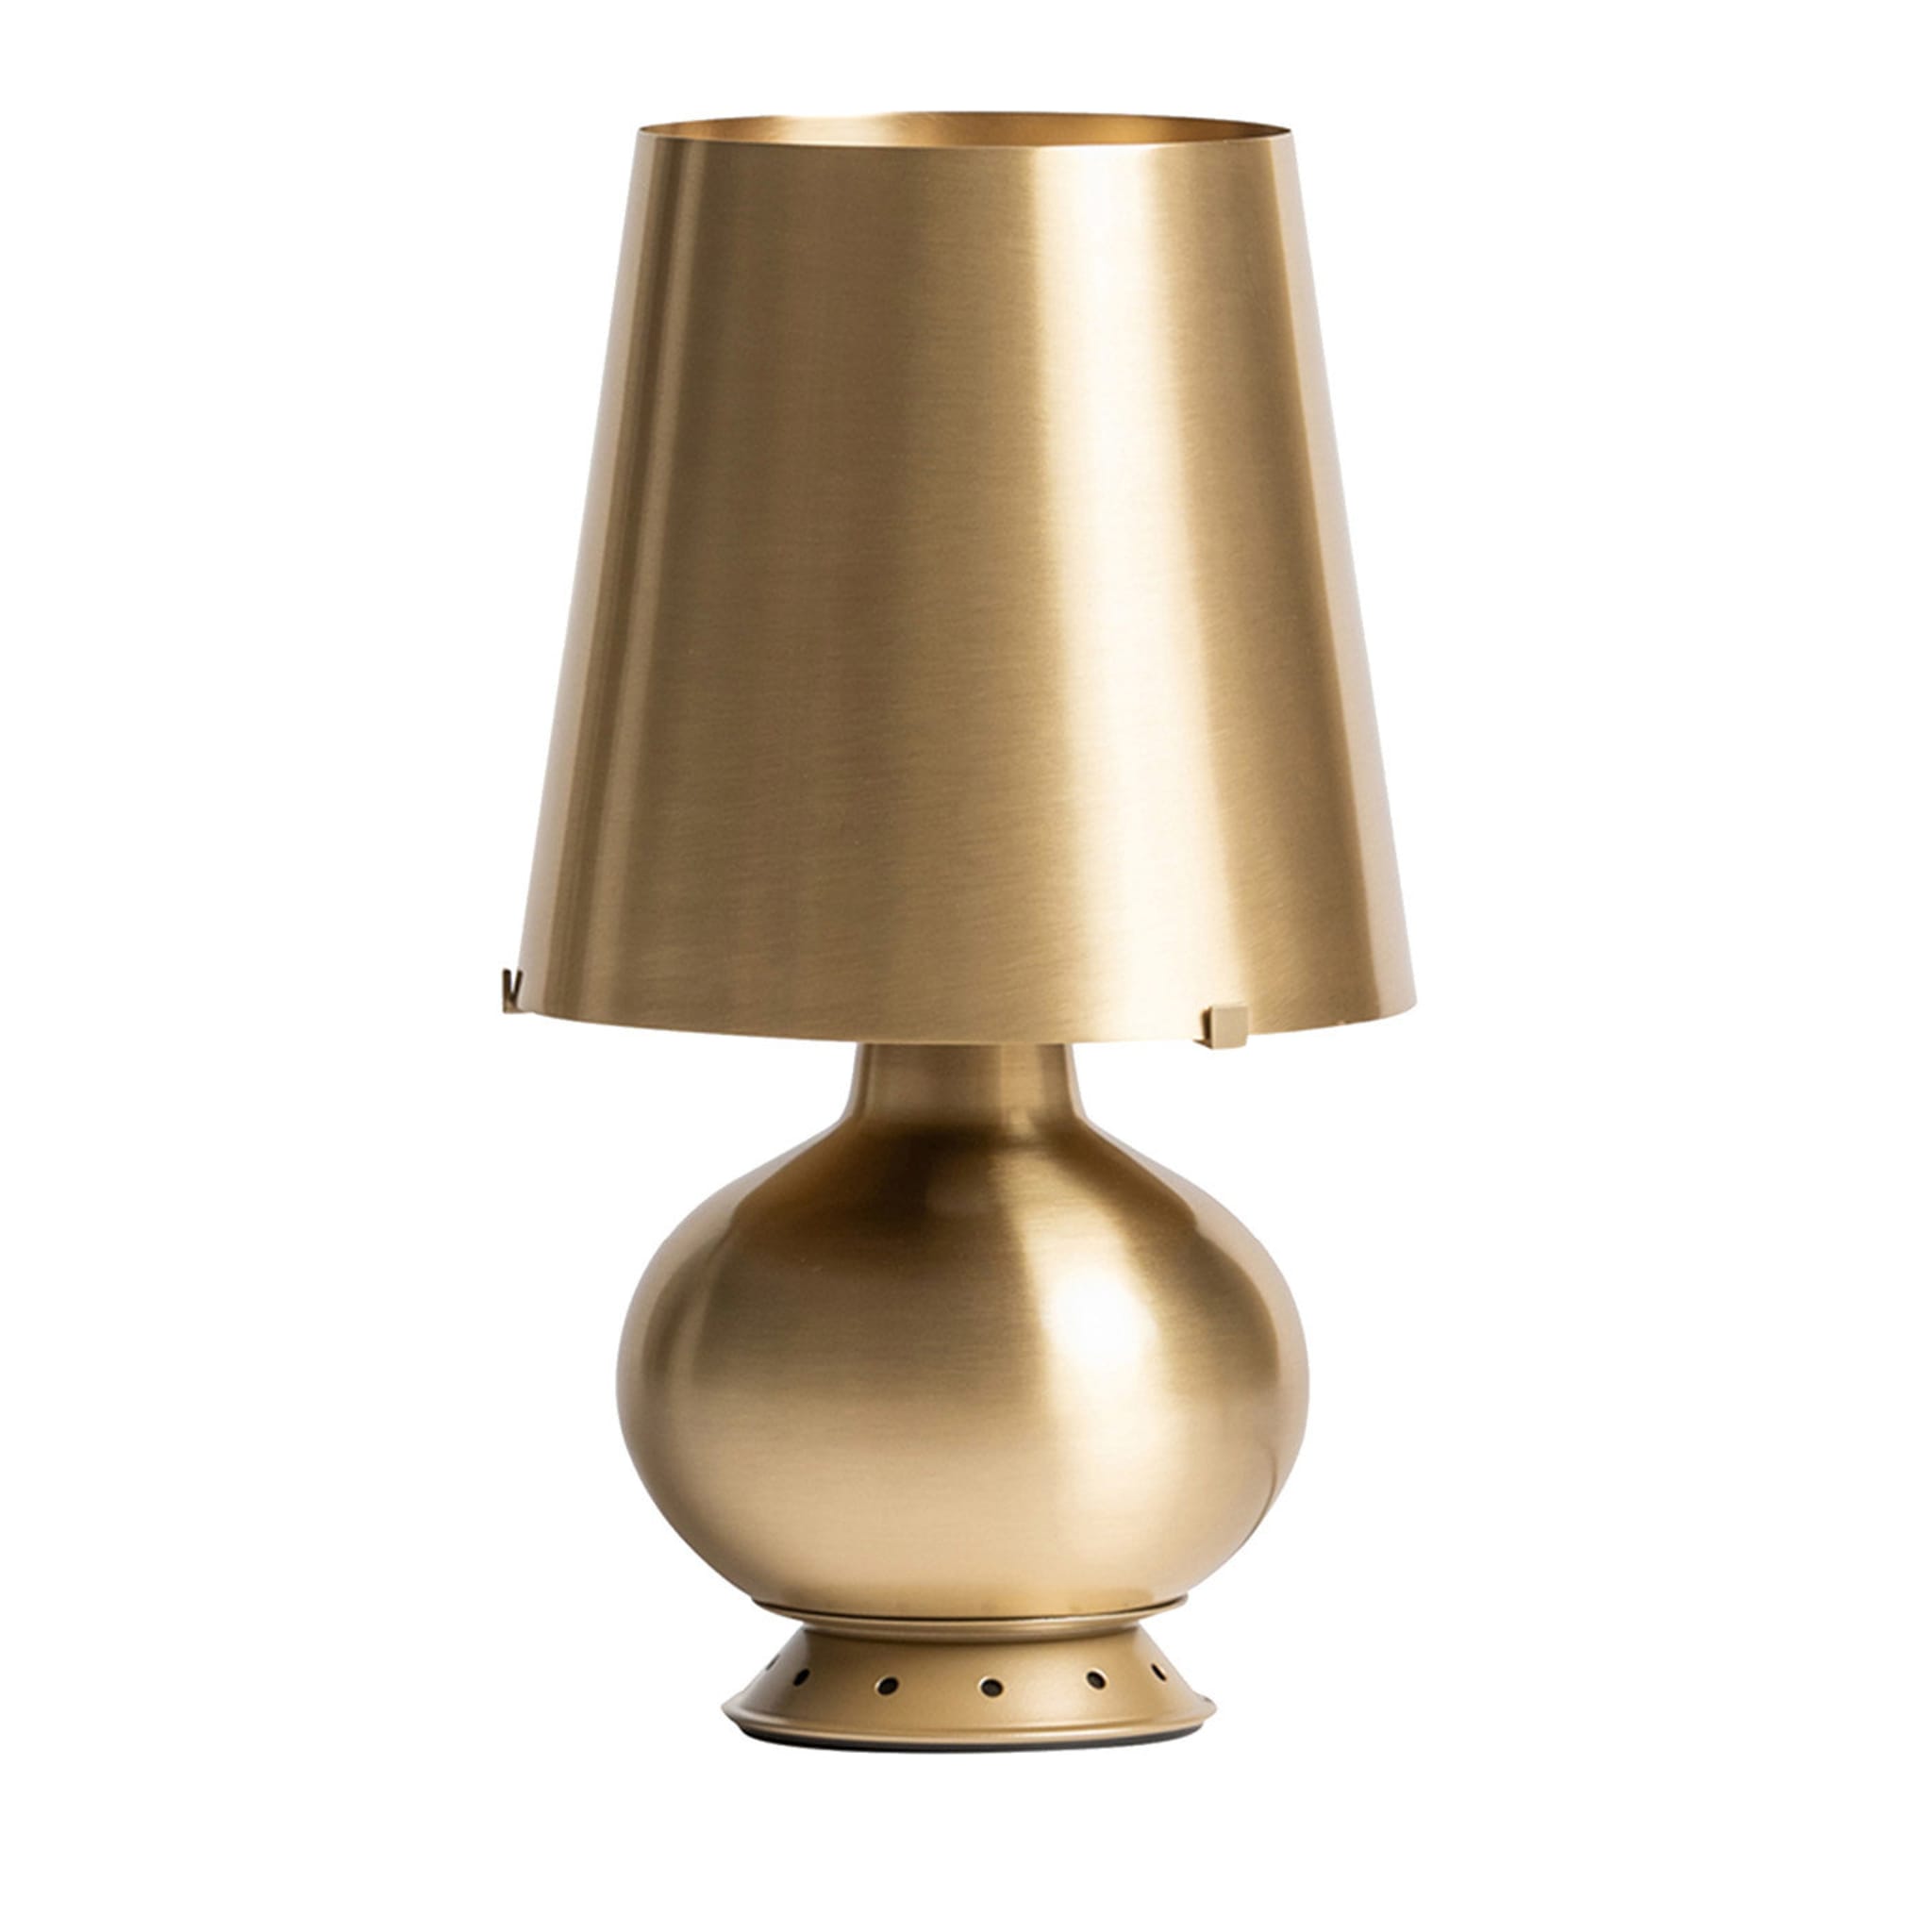 Fontana Small Brass Table Lamp by Max Ingrand - Main view